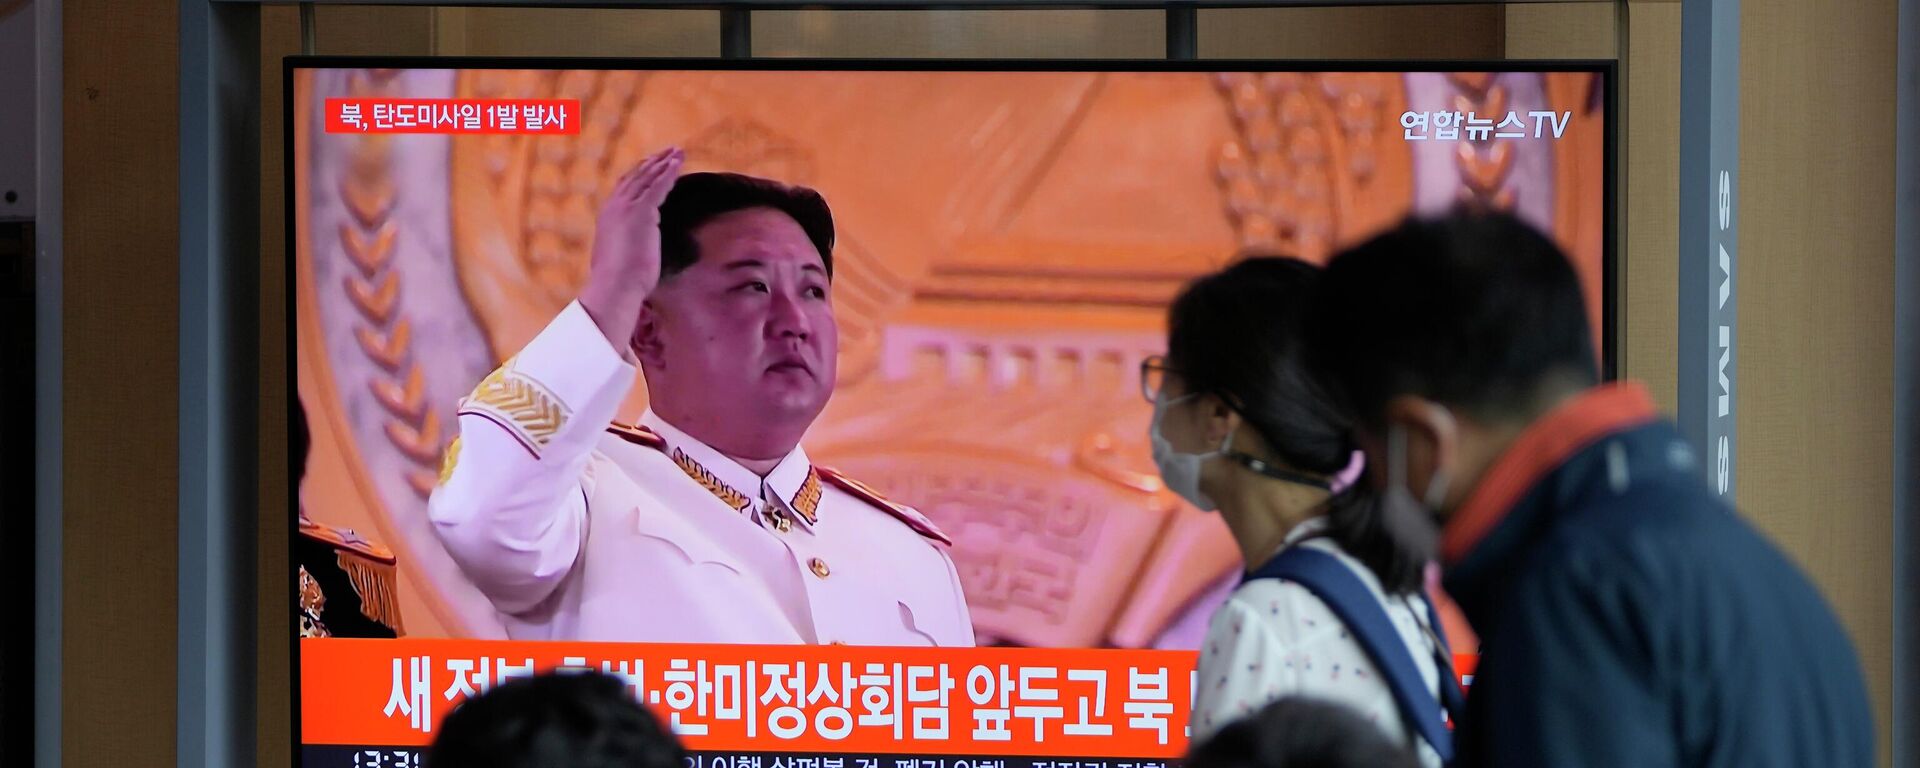 A TV screen showing a news program reporting on North Korea's missile launch with file footage of North Korean leader Kim Jong Un at a train station in Seoul, South Korea, Wednesday, May 4, 2022. - Sputnik International, 1920, 24.06.2022